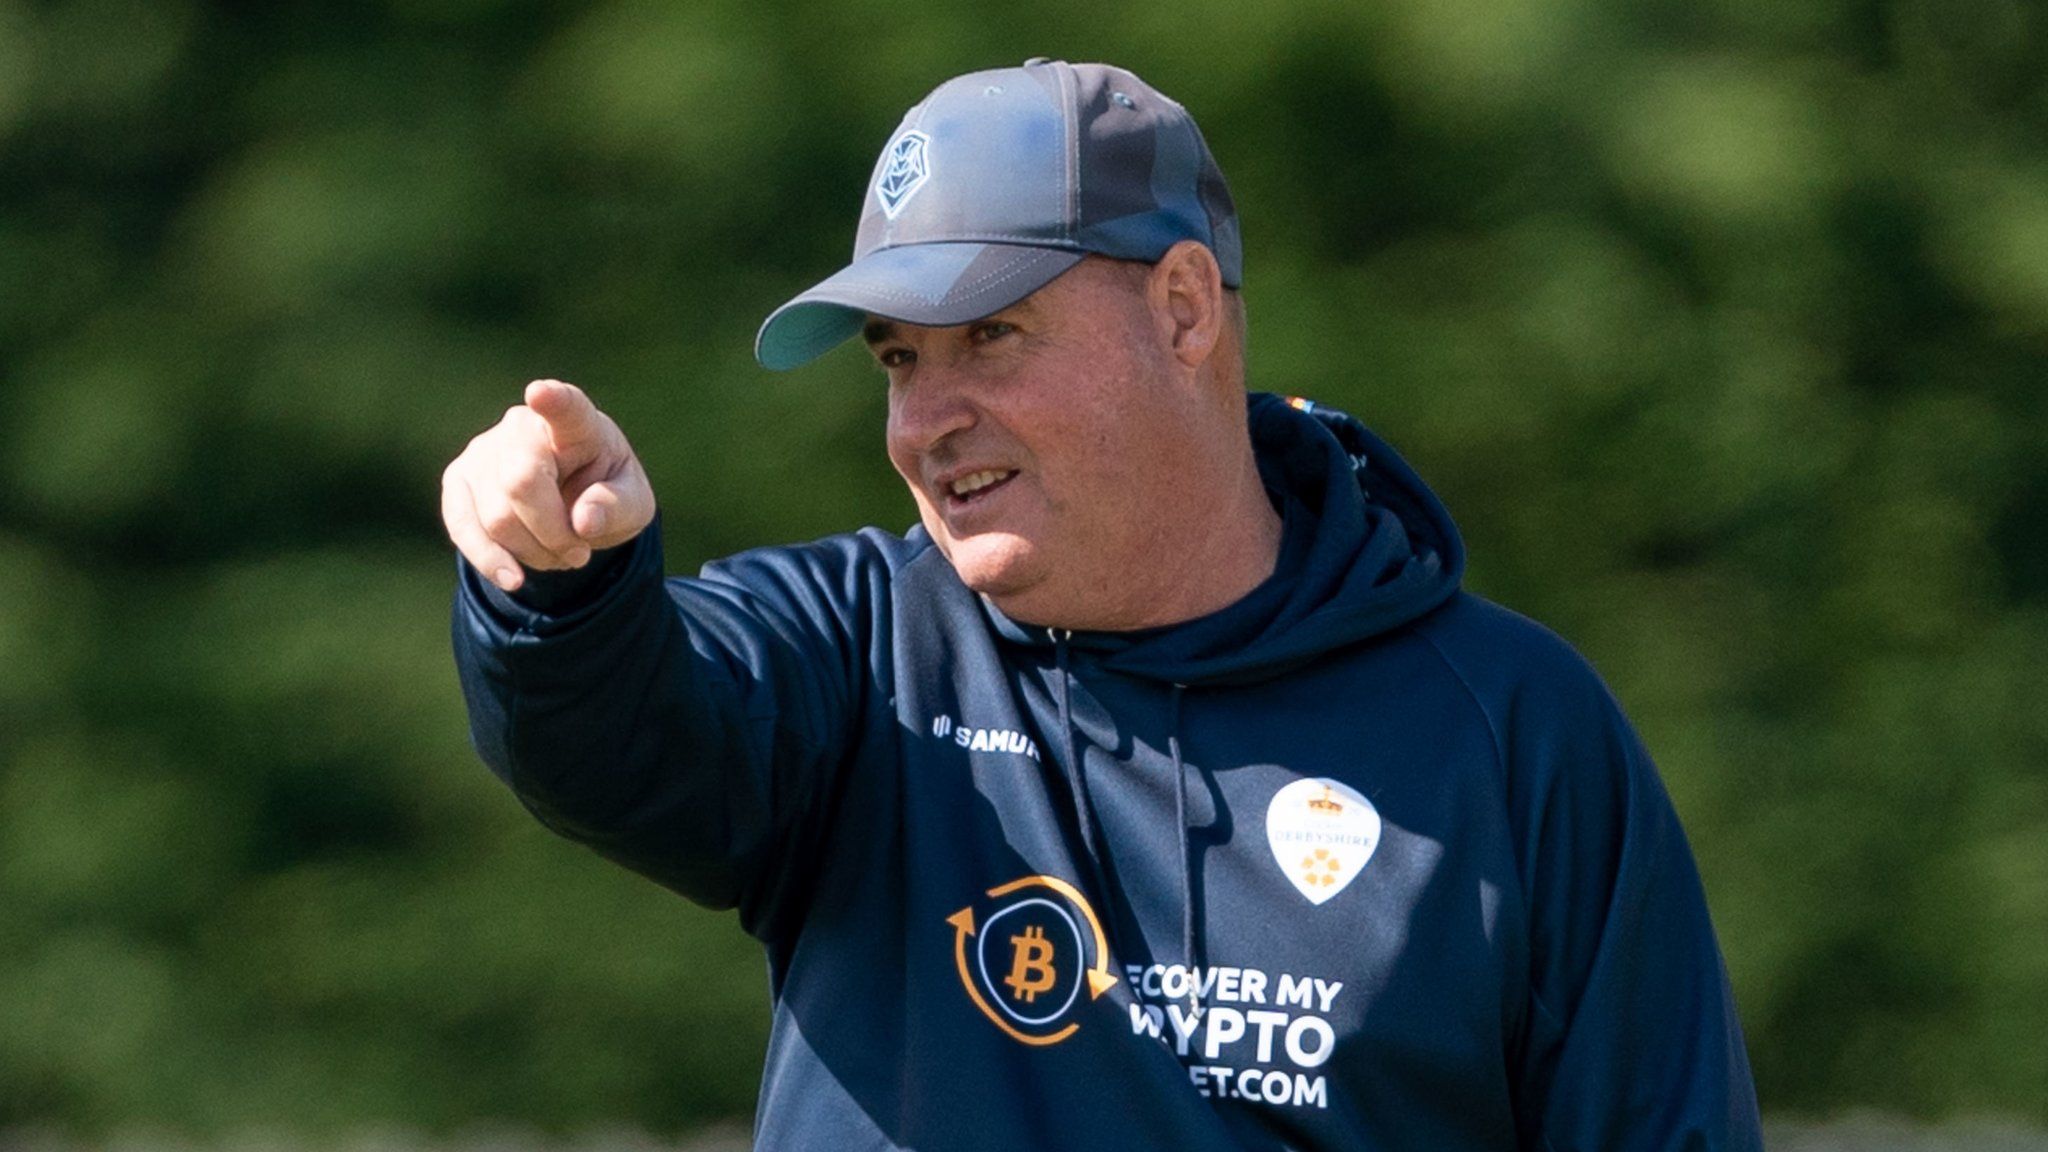 Derbyshire head of cricket Mickey Arthur points during a training session